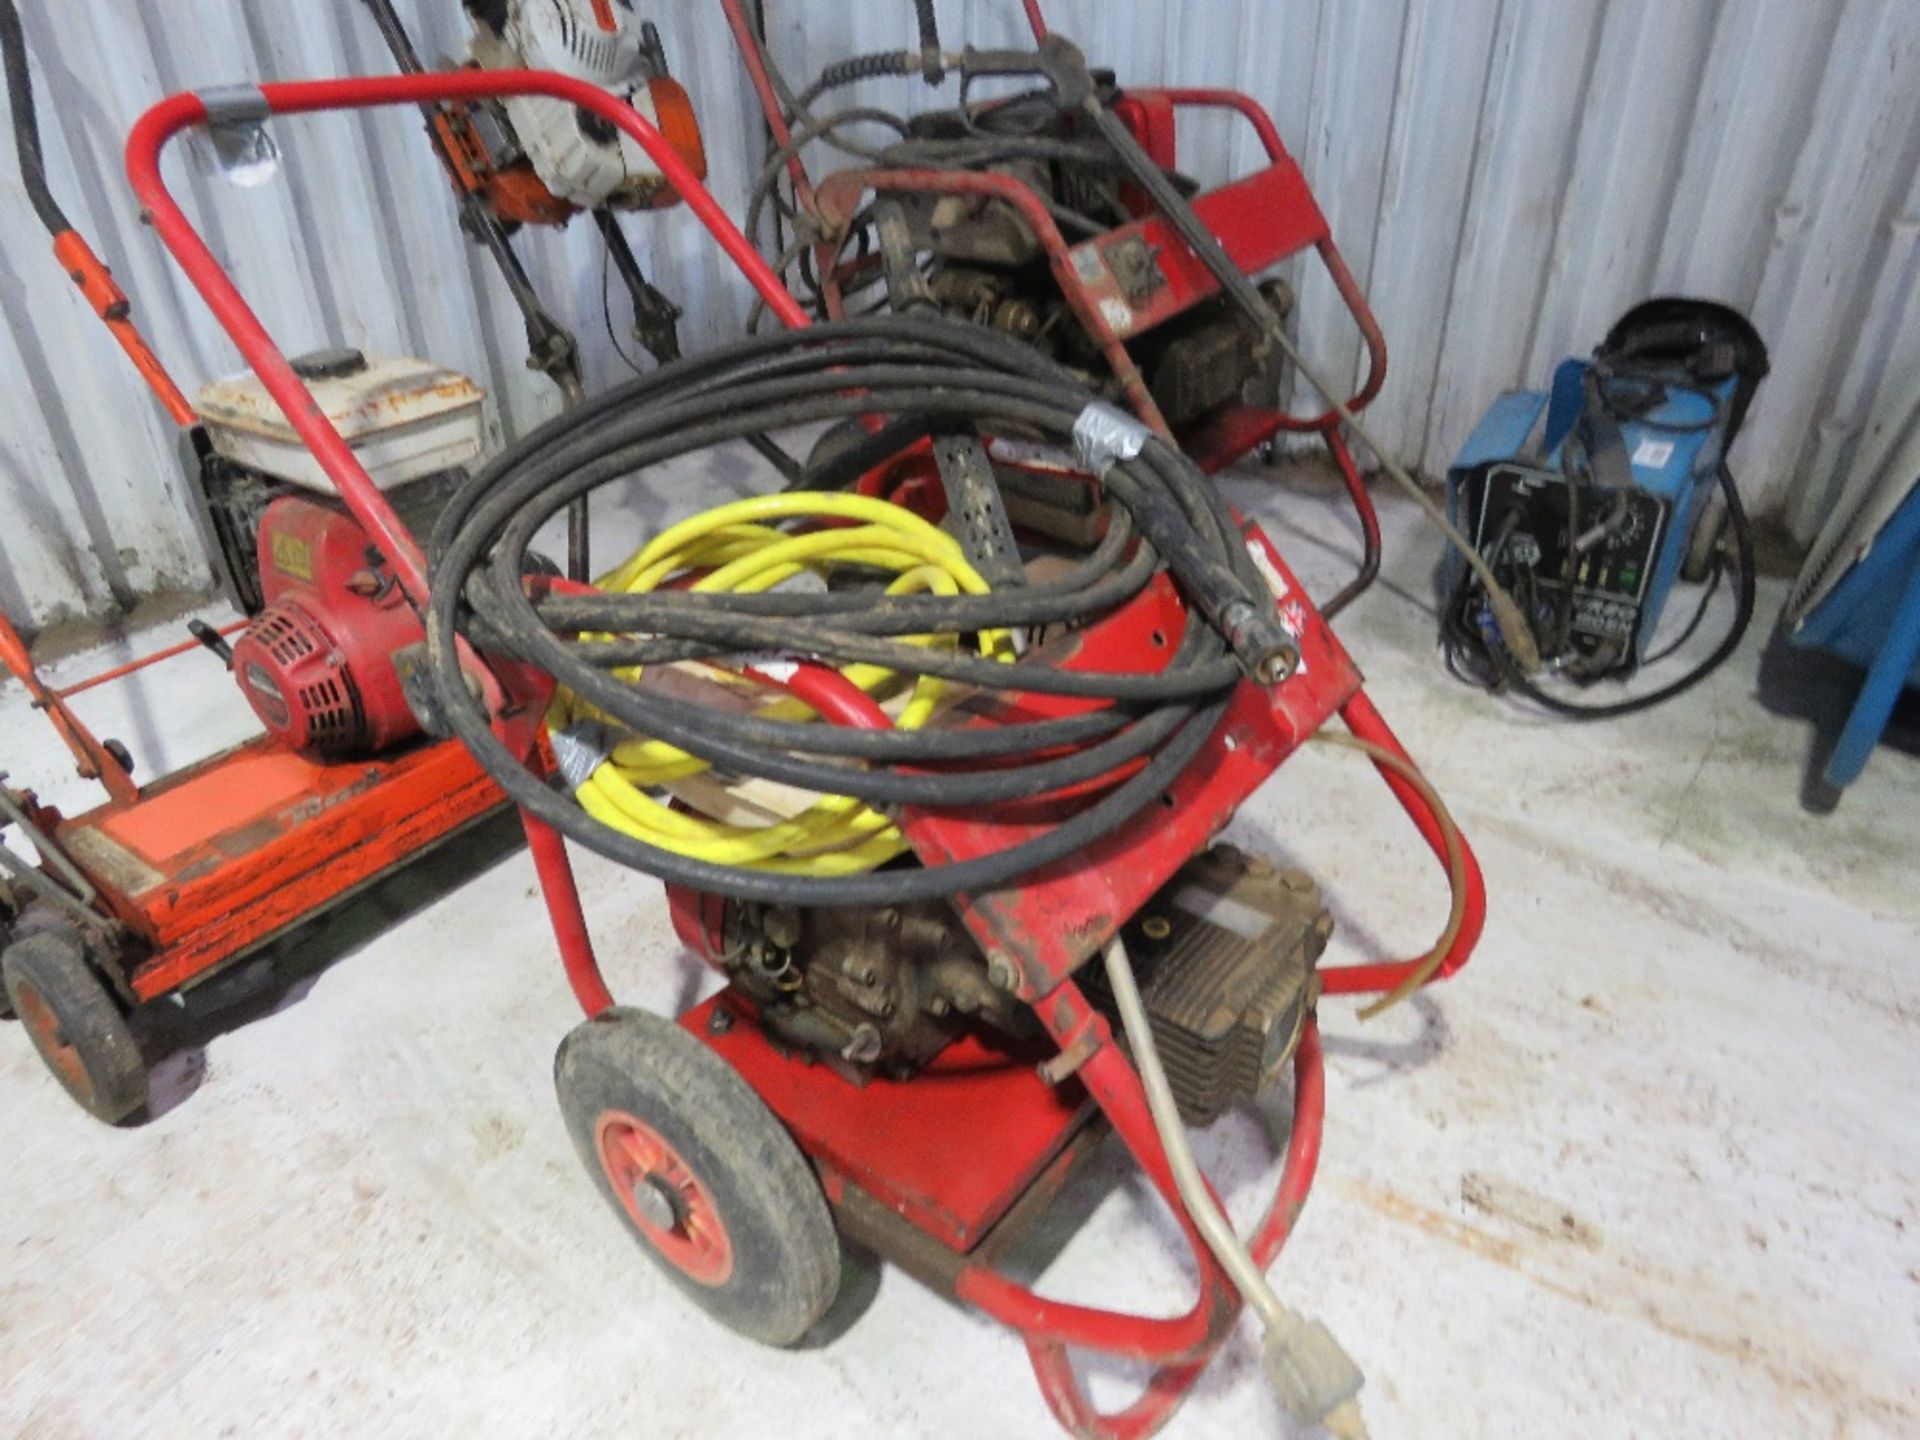 PETROL ENGINED PRESSURE WASHER WITH HOSE AND LANCE.